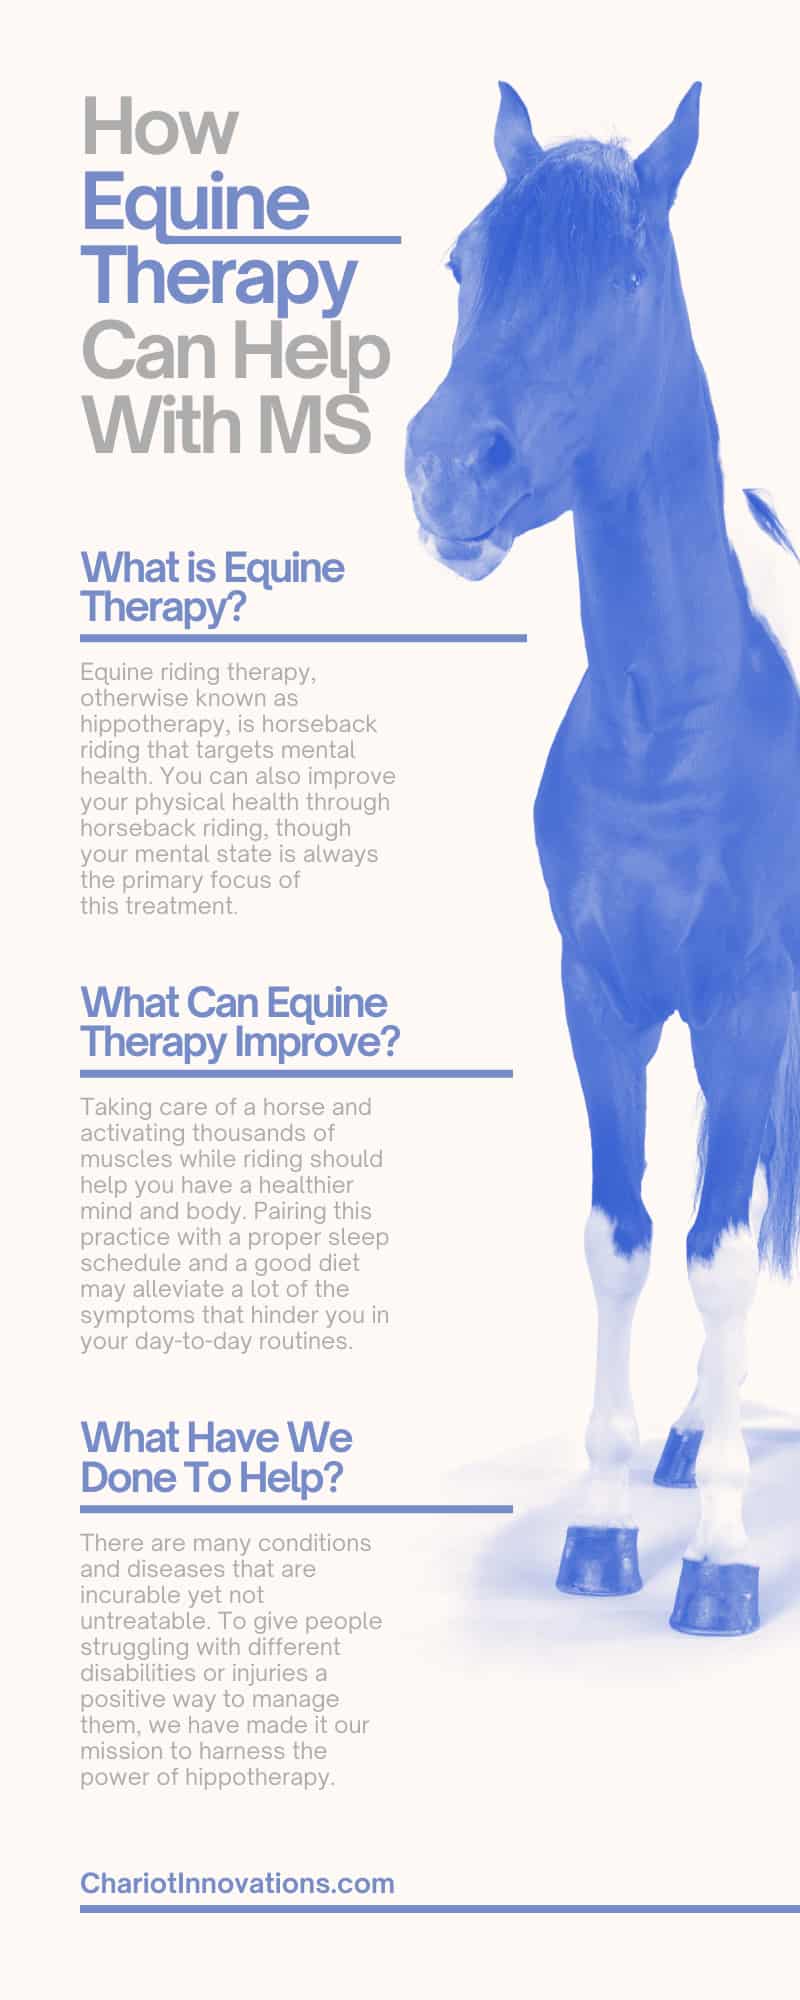 How Equine Therapy Can Help With MS